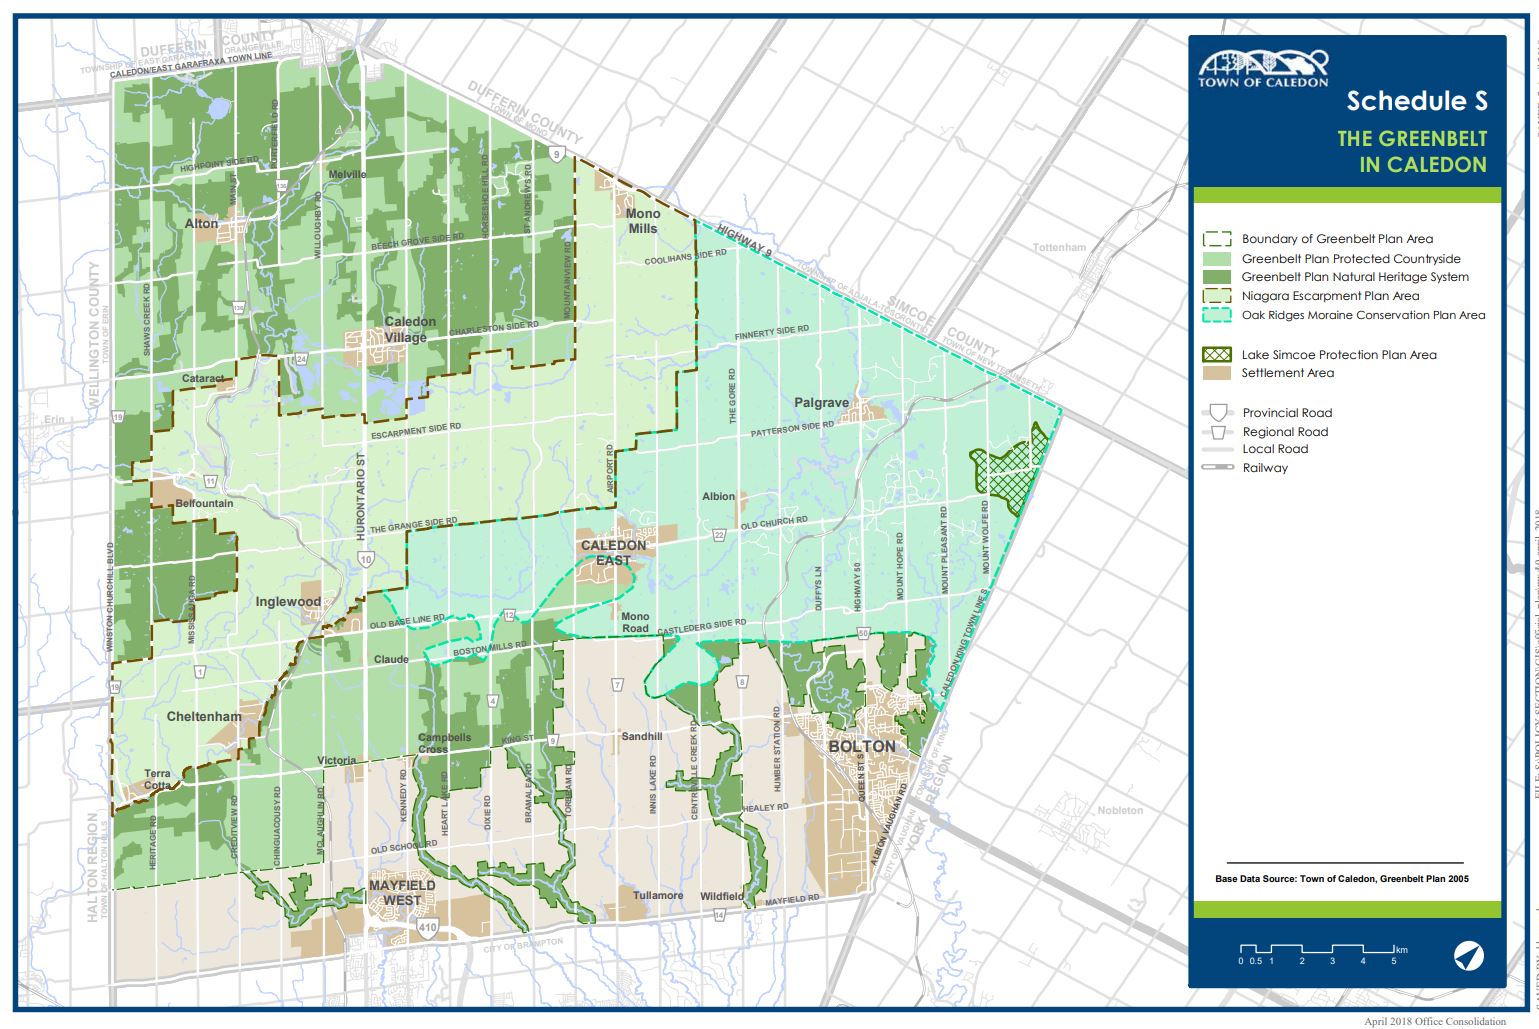 Schedule S from Official Plan Greenbelt Plan in Caledon